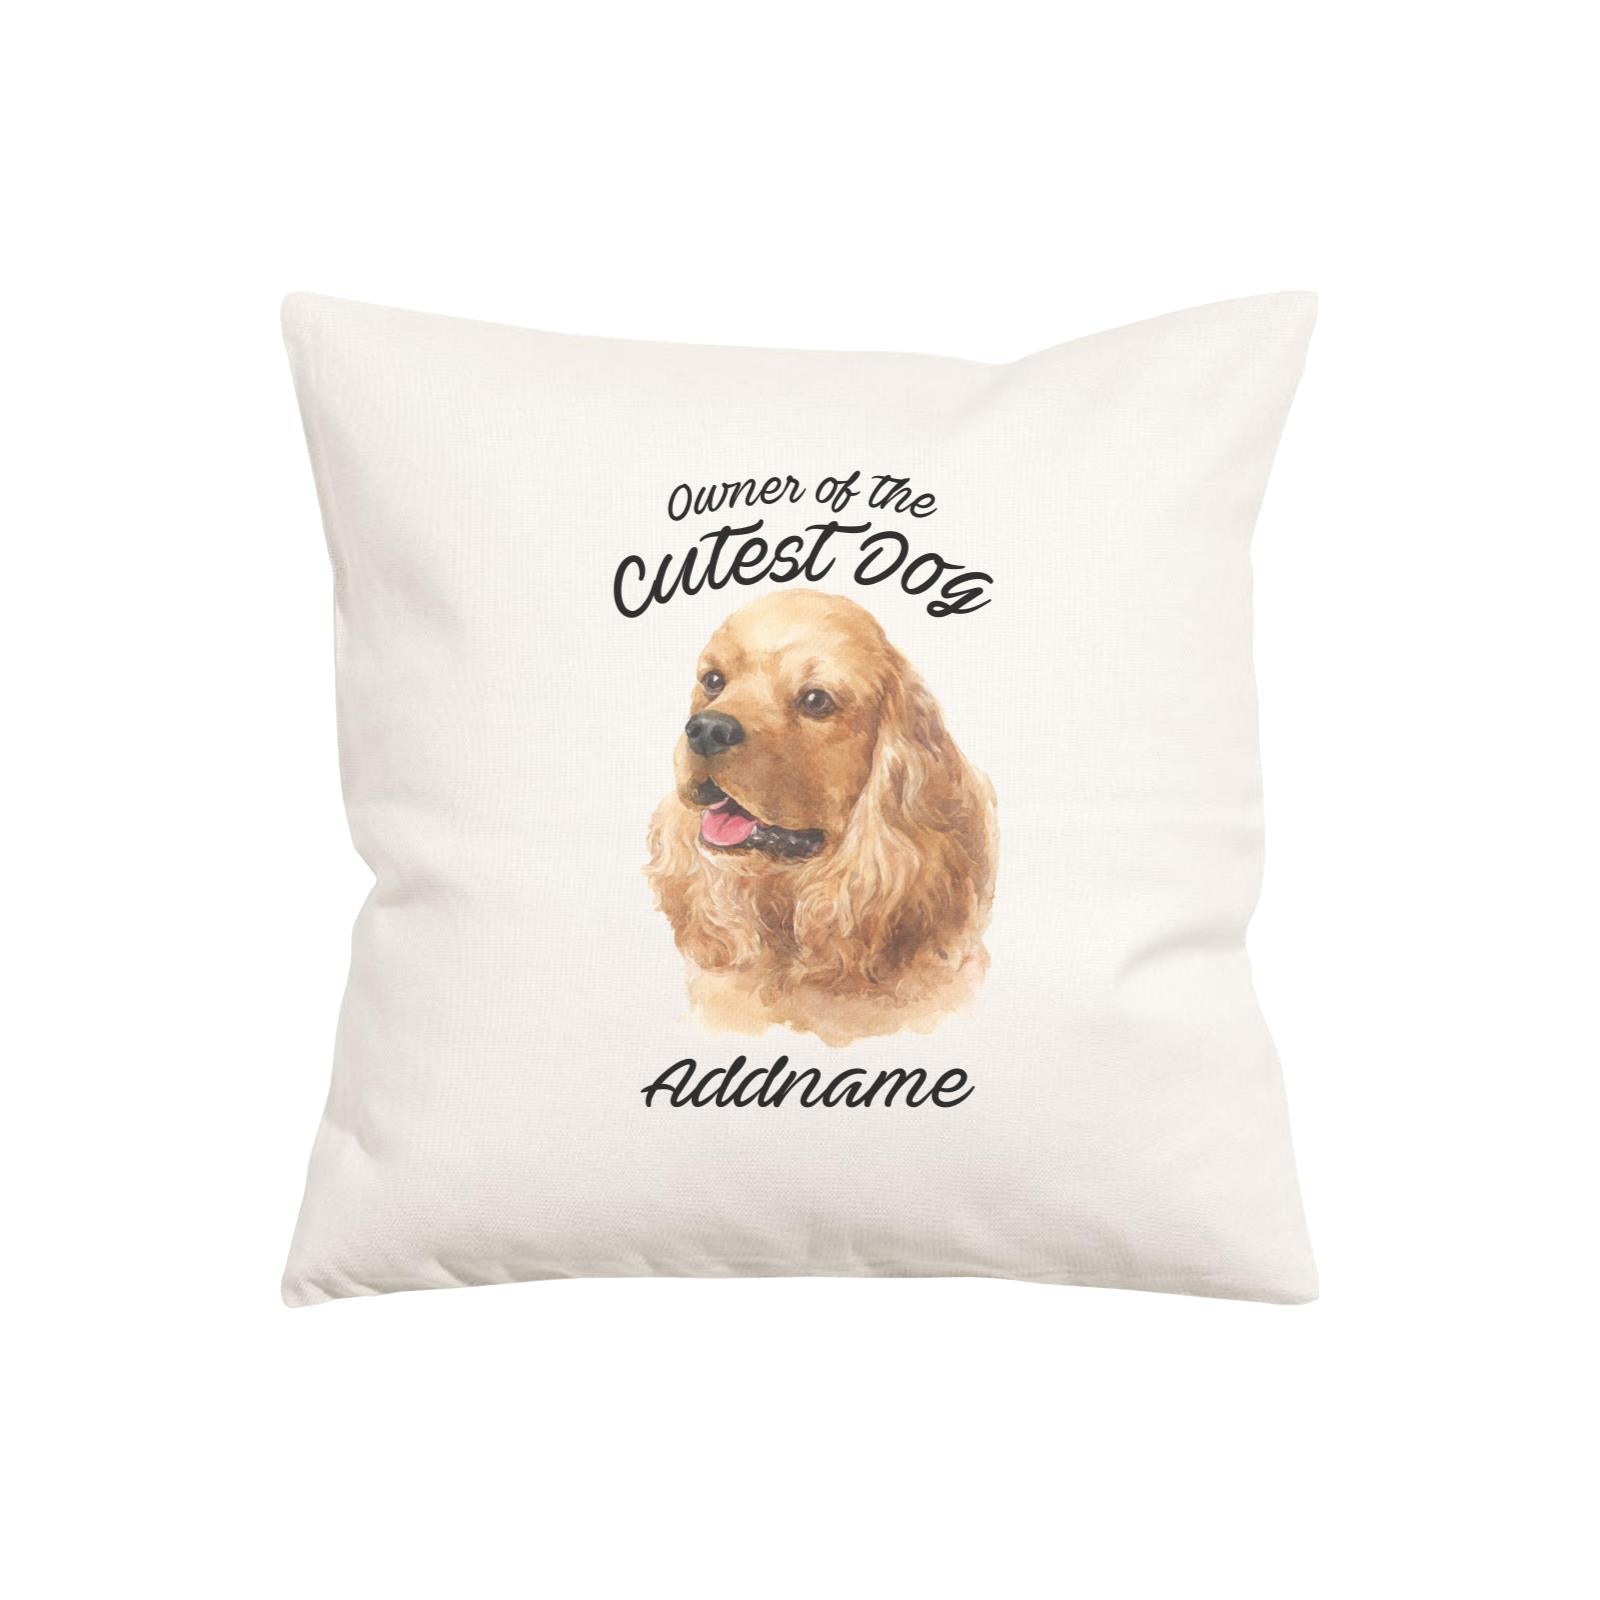 Watercolor Dog Owner Of The Cutest Dog Cocker Spaniel Addname Pillow Cushion